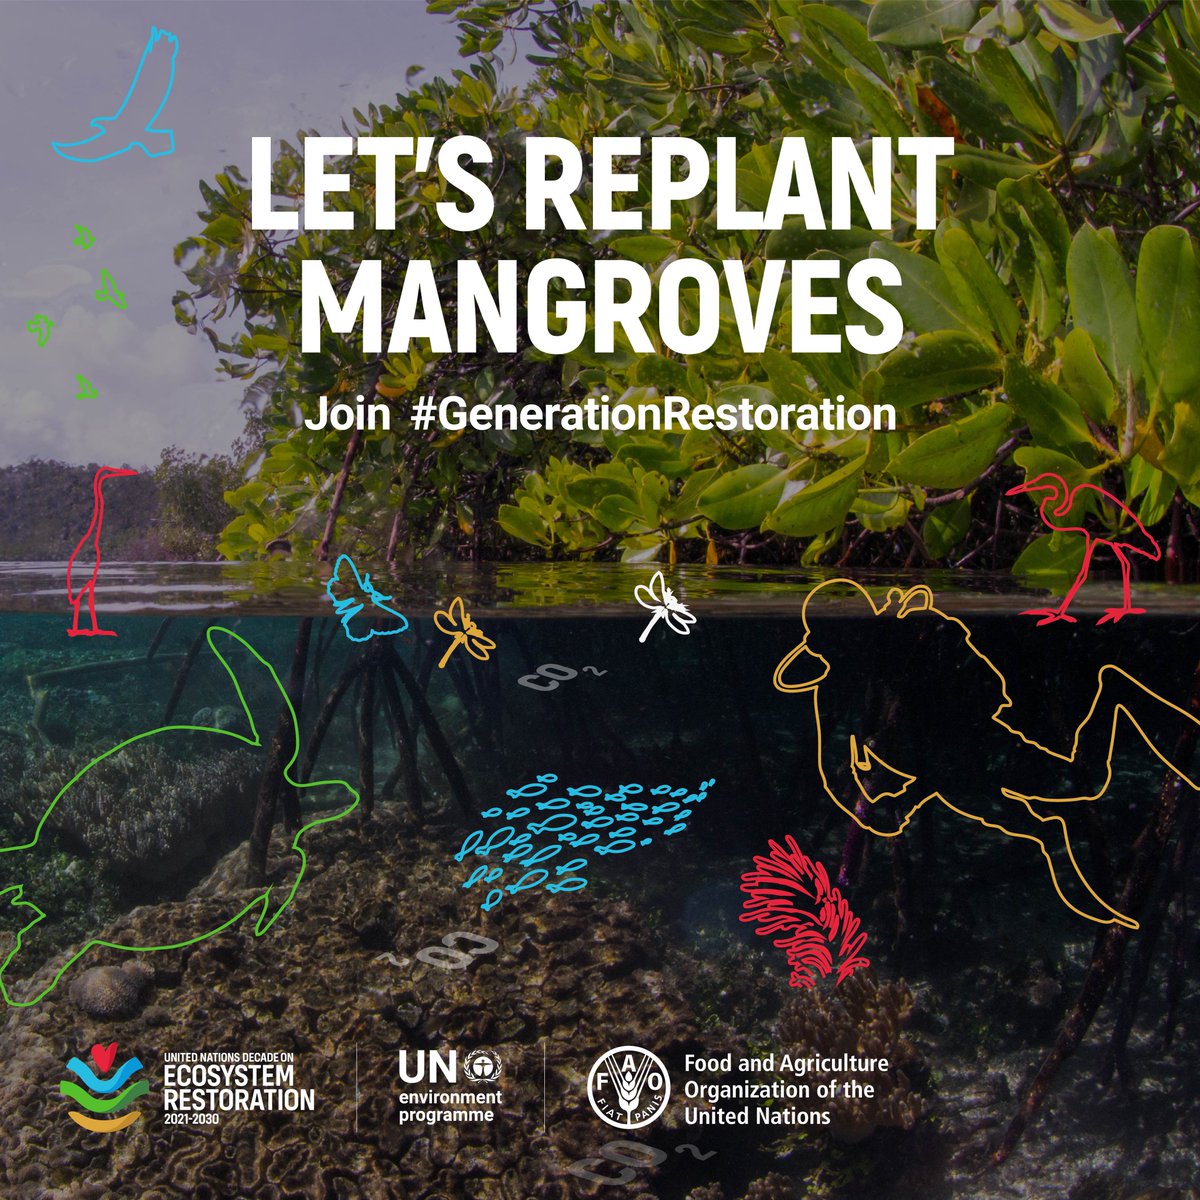 🌱 Mangroves are critical in tackling some of the world’s greatest challenges - they provide coastal defence, absorb carbon & are rich in biodiversity 🐠🐡

But #mangroves are disappearing - find out more this #WorldMangroveDay 👉 bit.ly/2TDx3jo

#GenerationRestoration